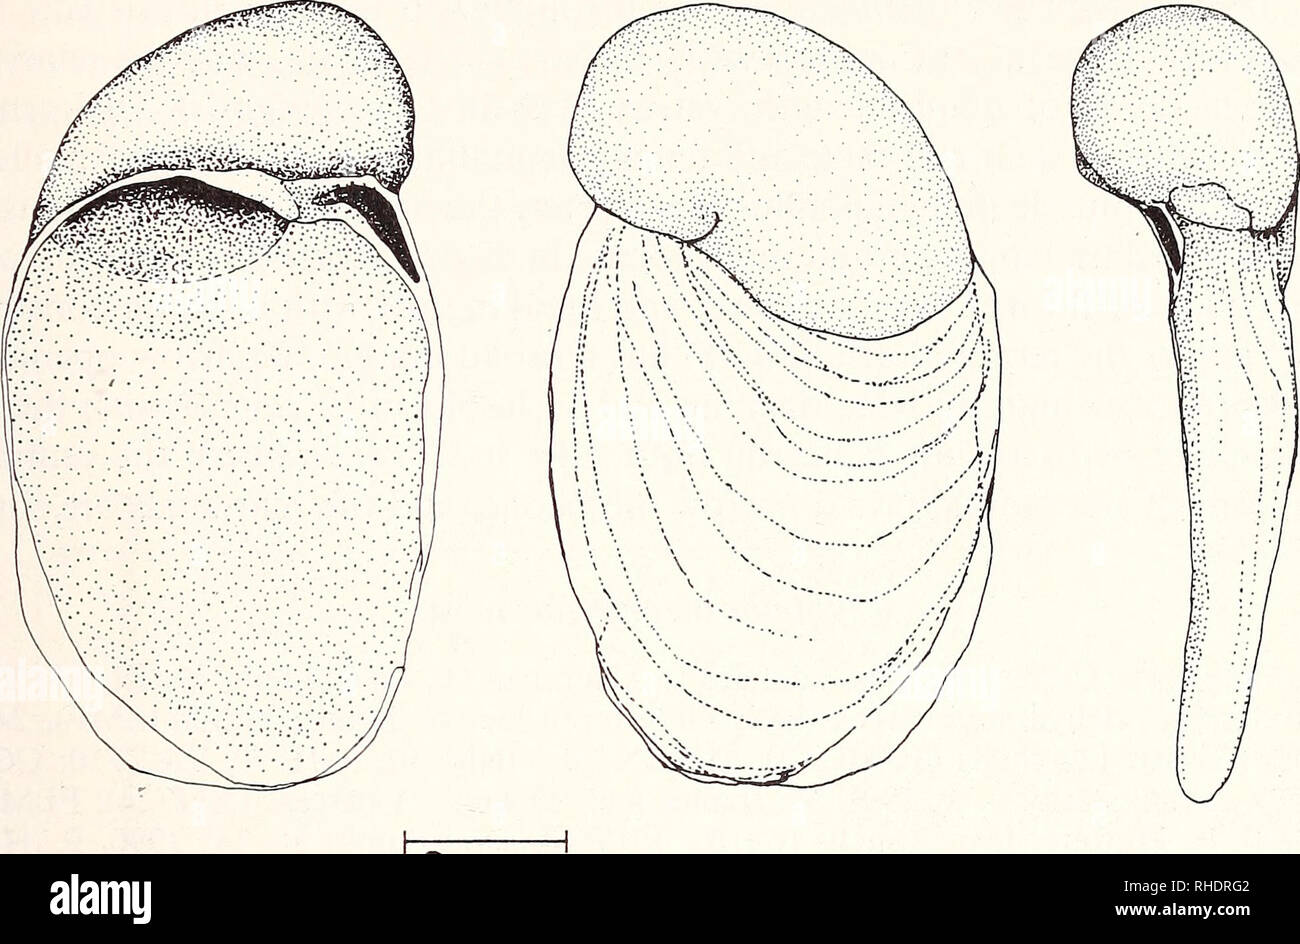 . Bonner zoologische Beiträge : Herausgeber: Zoologisches Forschungsinstitut und Museum Alexander Koenig, Bonn. Biology; Zoology. New Cryptella from the Canary Islands 345. 2 mm Fig. 7: Cryptella famarae n. sp.; shell in dorsal, ventral and lateral view. Shell: Large shell with a large protoconch (length x width in the type series: 5,24 ± 0,29 X 3,32 ± 0,19, n = 9; for further measurements see Hutterer 1990: Tab. 1, sample &quot;Lanzarote sub f.&quot;). The nucleus of the latter is clearly visible, as the suture stays nearly uncalcified. The aperture of the protoconch is small, nearly round, i Stock Photo